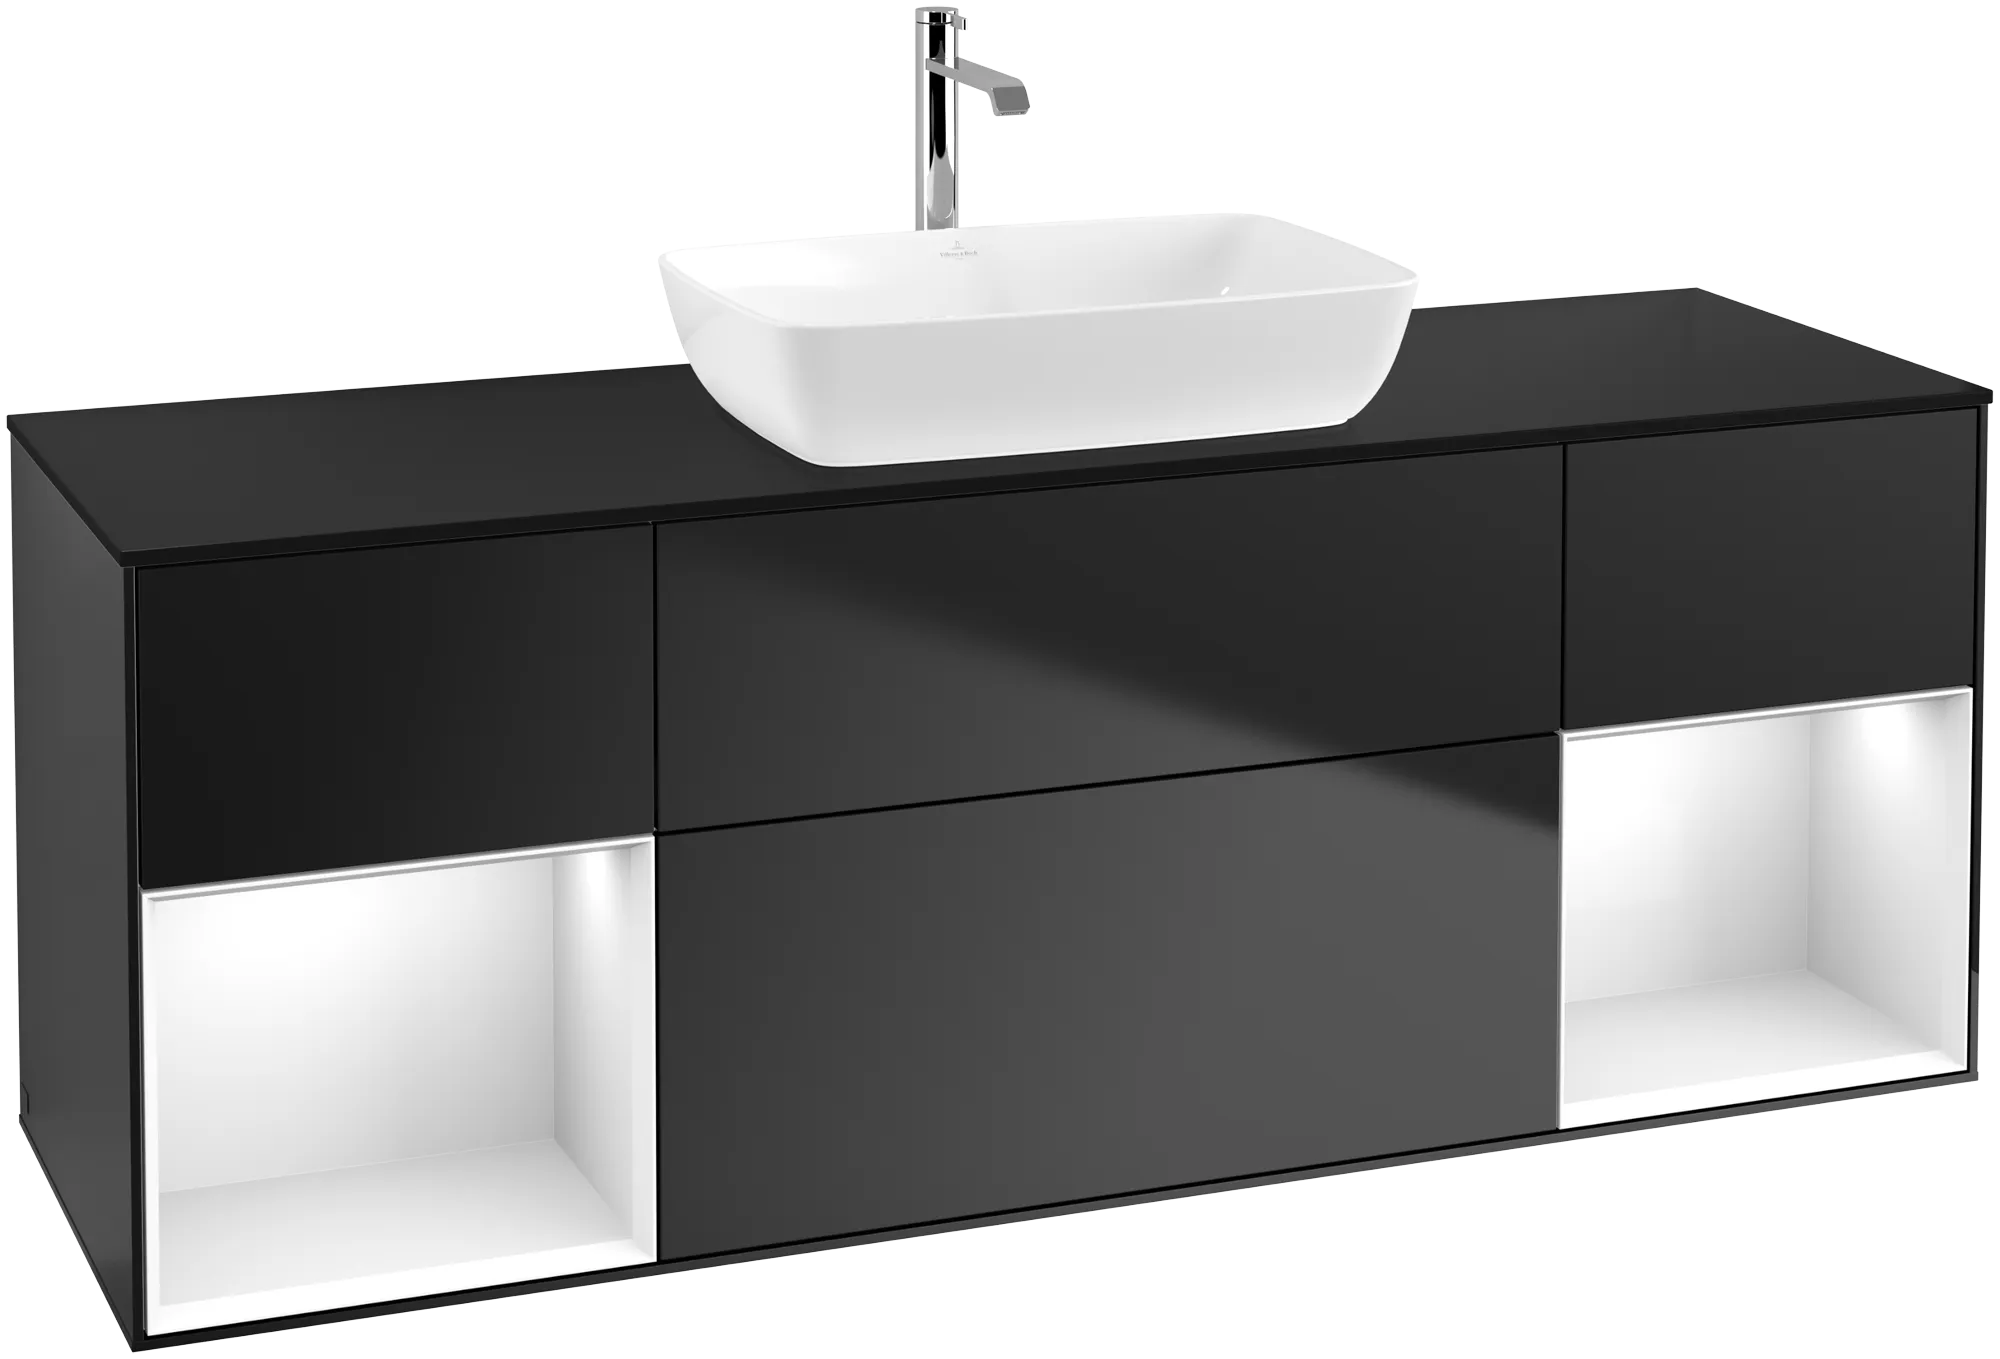 Зображення з  VILLEROY BOCH Finion Vanity unit, with lighting, 4 pull-out compartments, 1600 x 603 x 501 mm, Black Matt Lacquer / Glossy White Lacquer / Glass Black Matt #G862GFPD